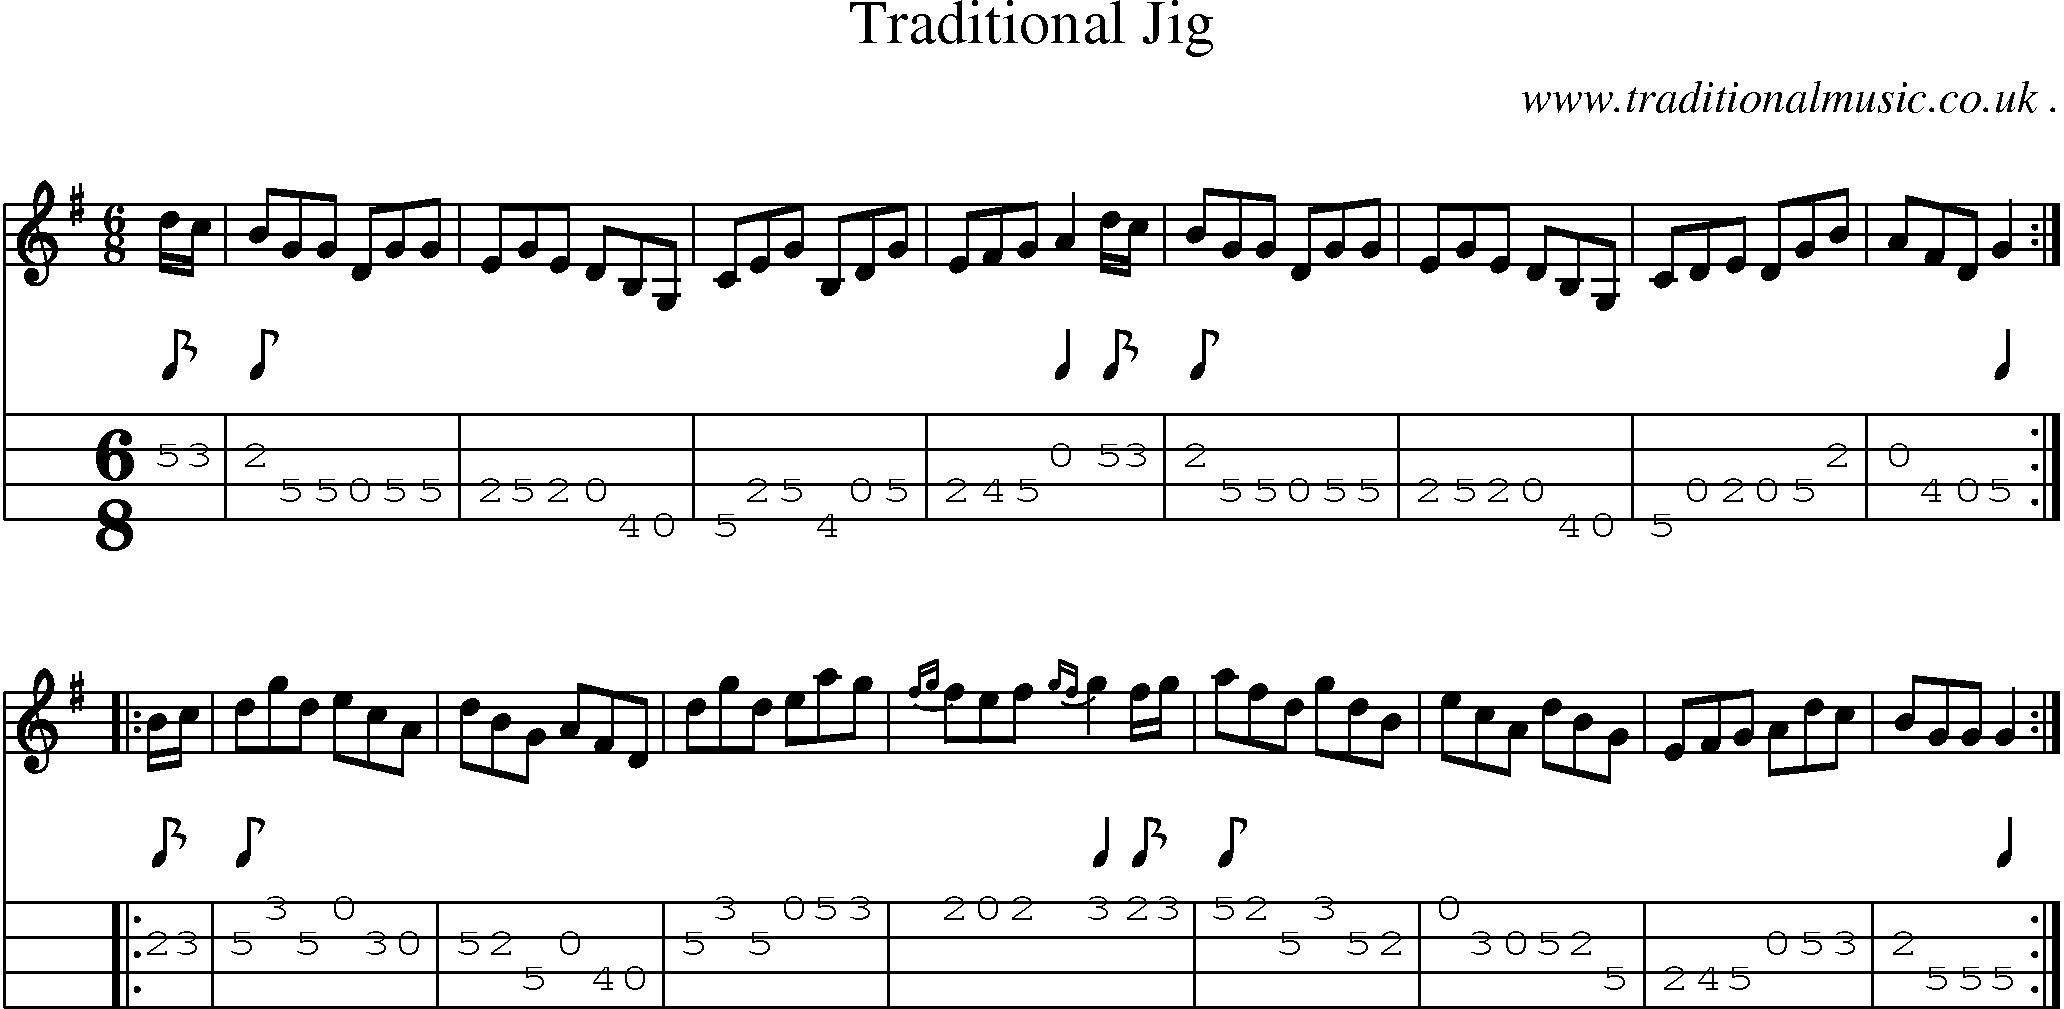 Sheet-music  score, Chords and Mandolin Tabs for Traditional Jig